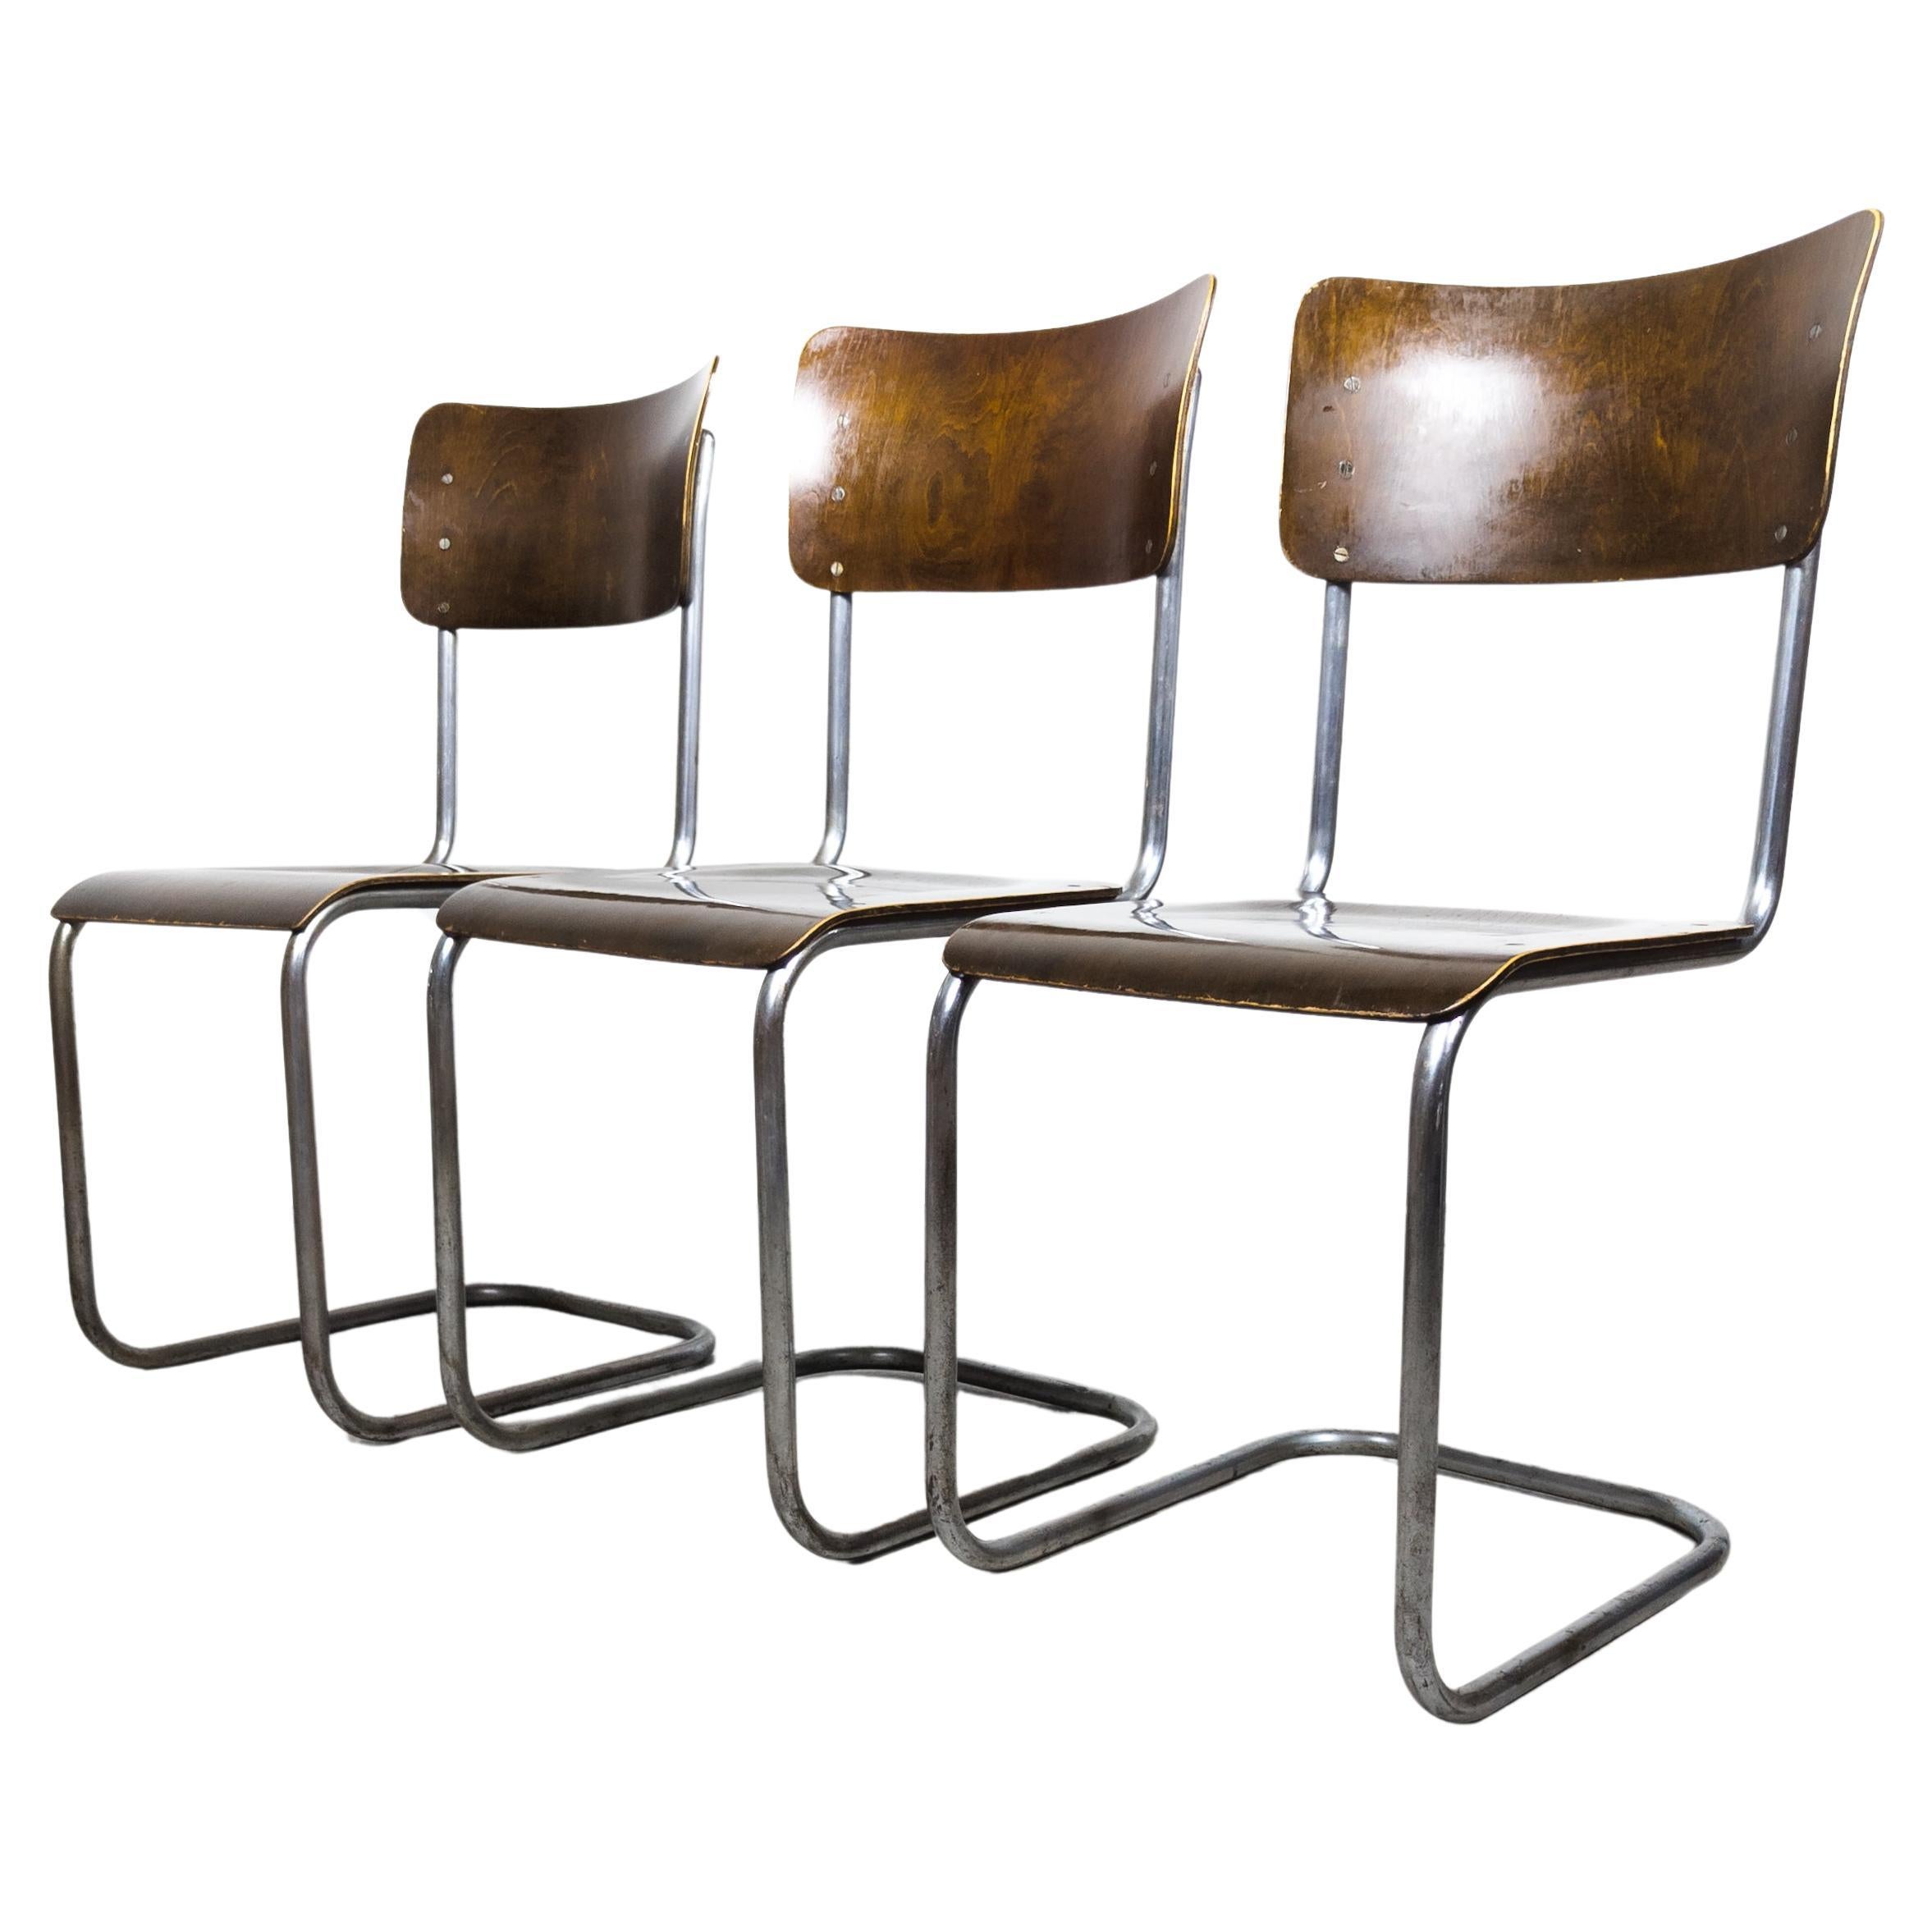 Mart Stam Dining Room Chairs